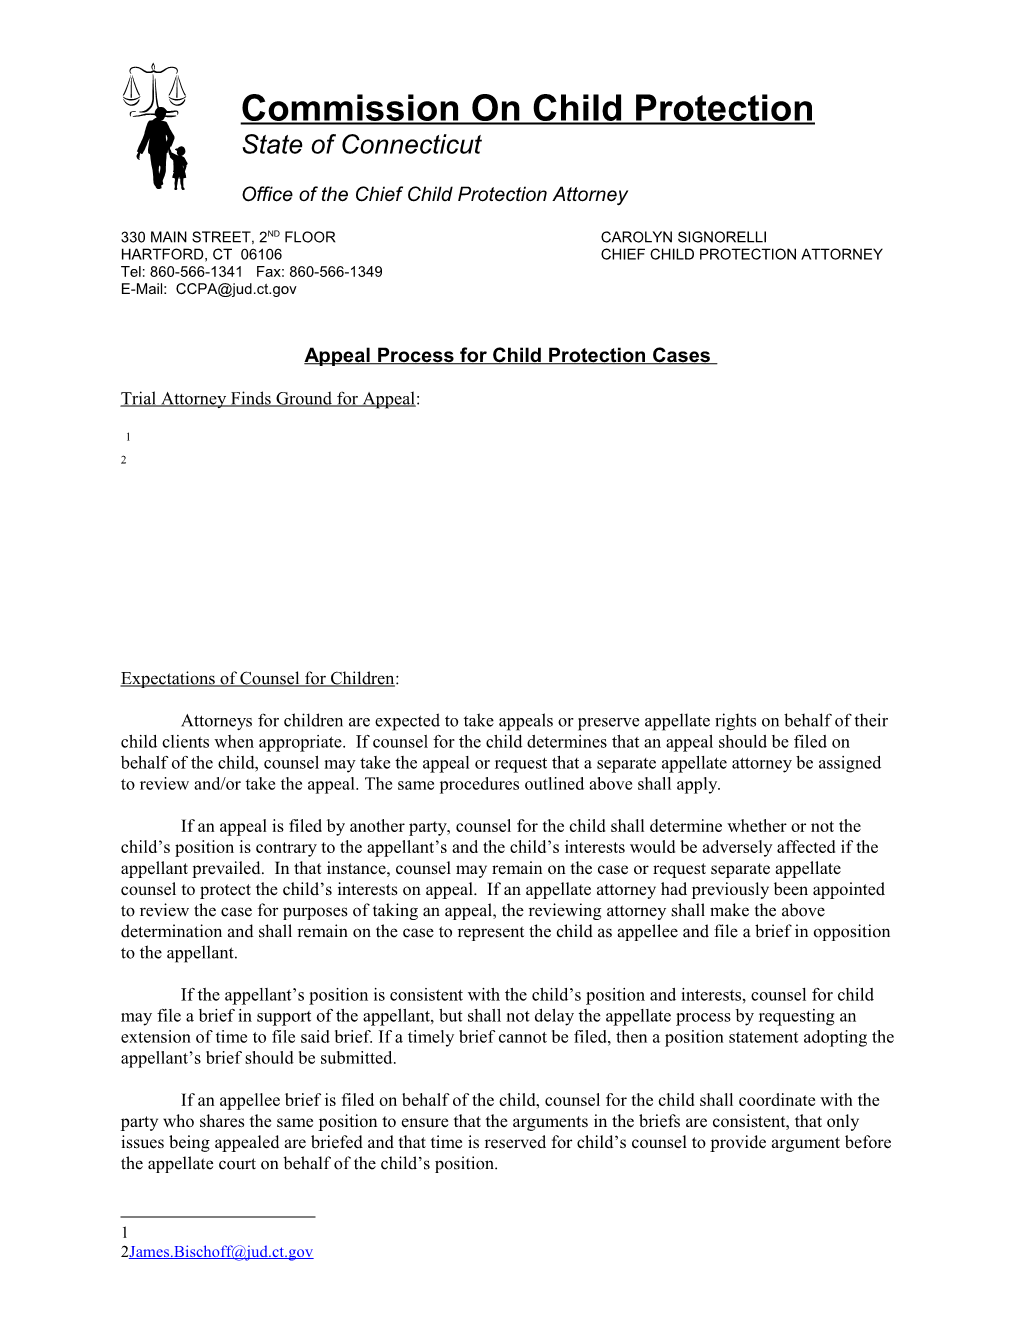 Office of the Chief Child Protection Attorney